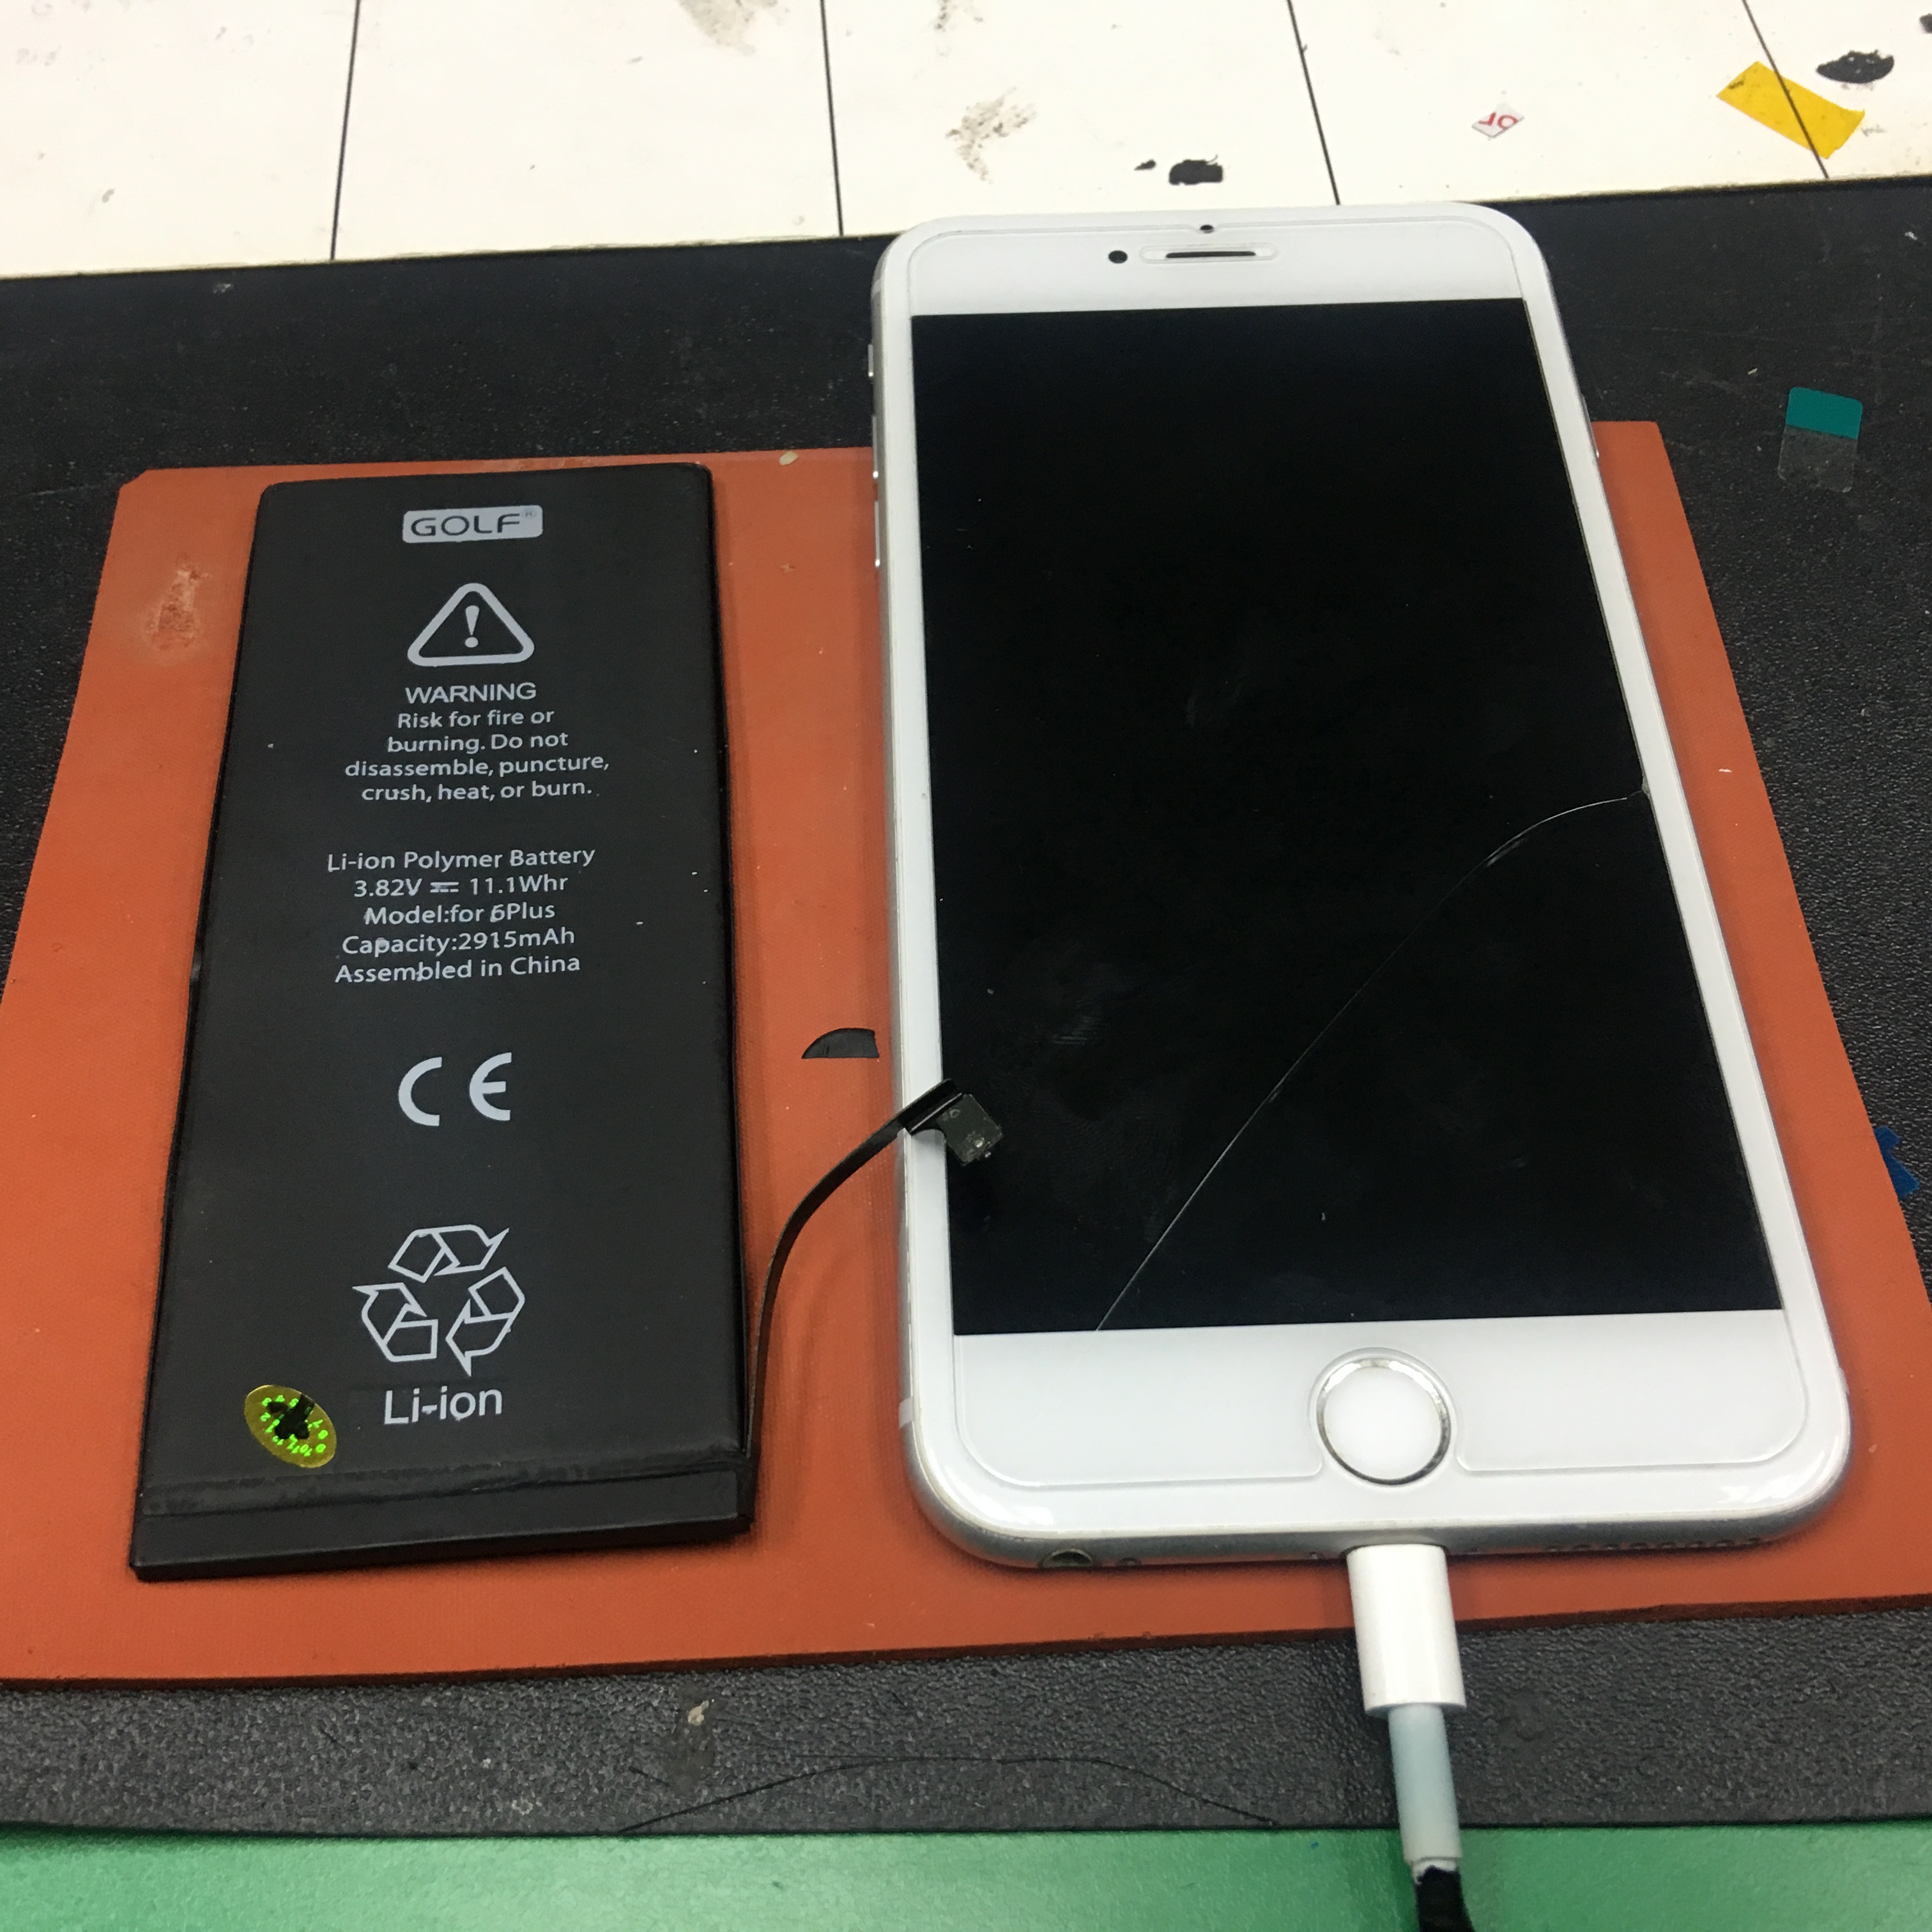 Battery iPhone 6 Plus replacement